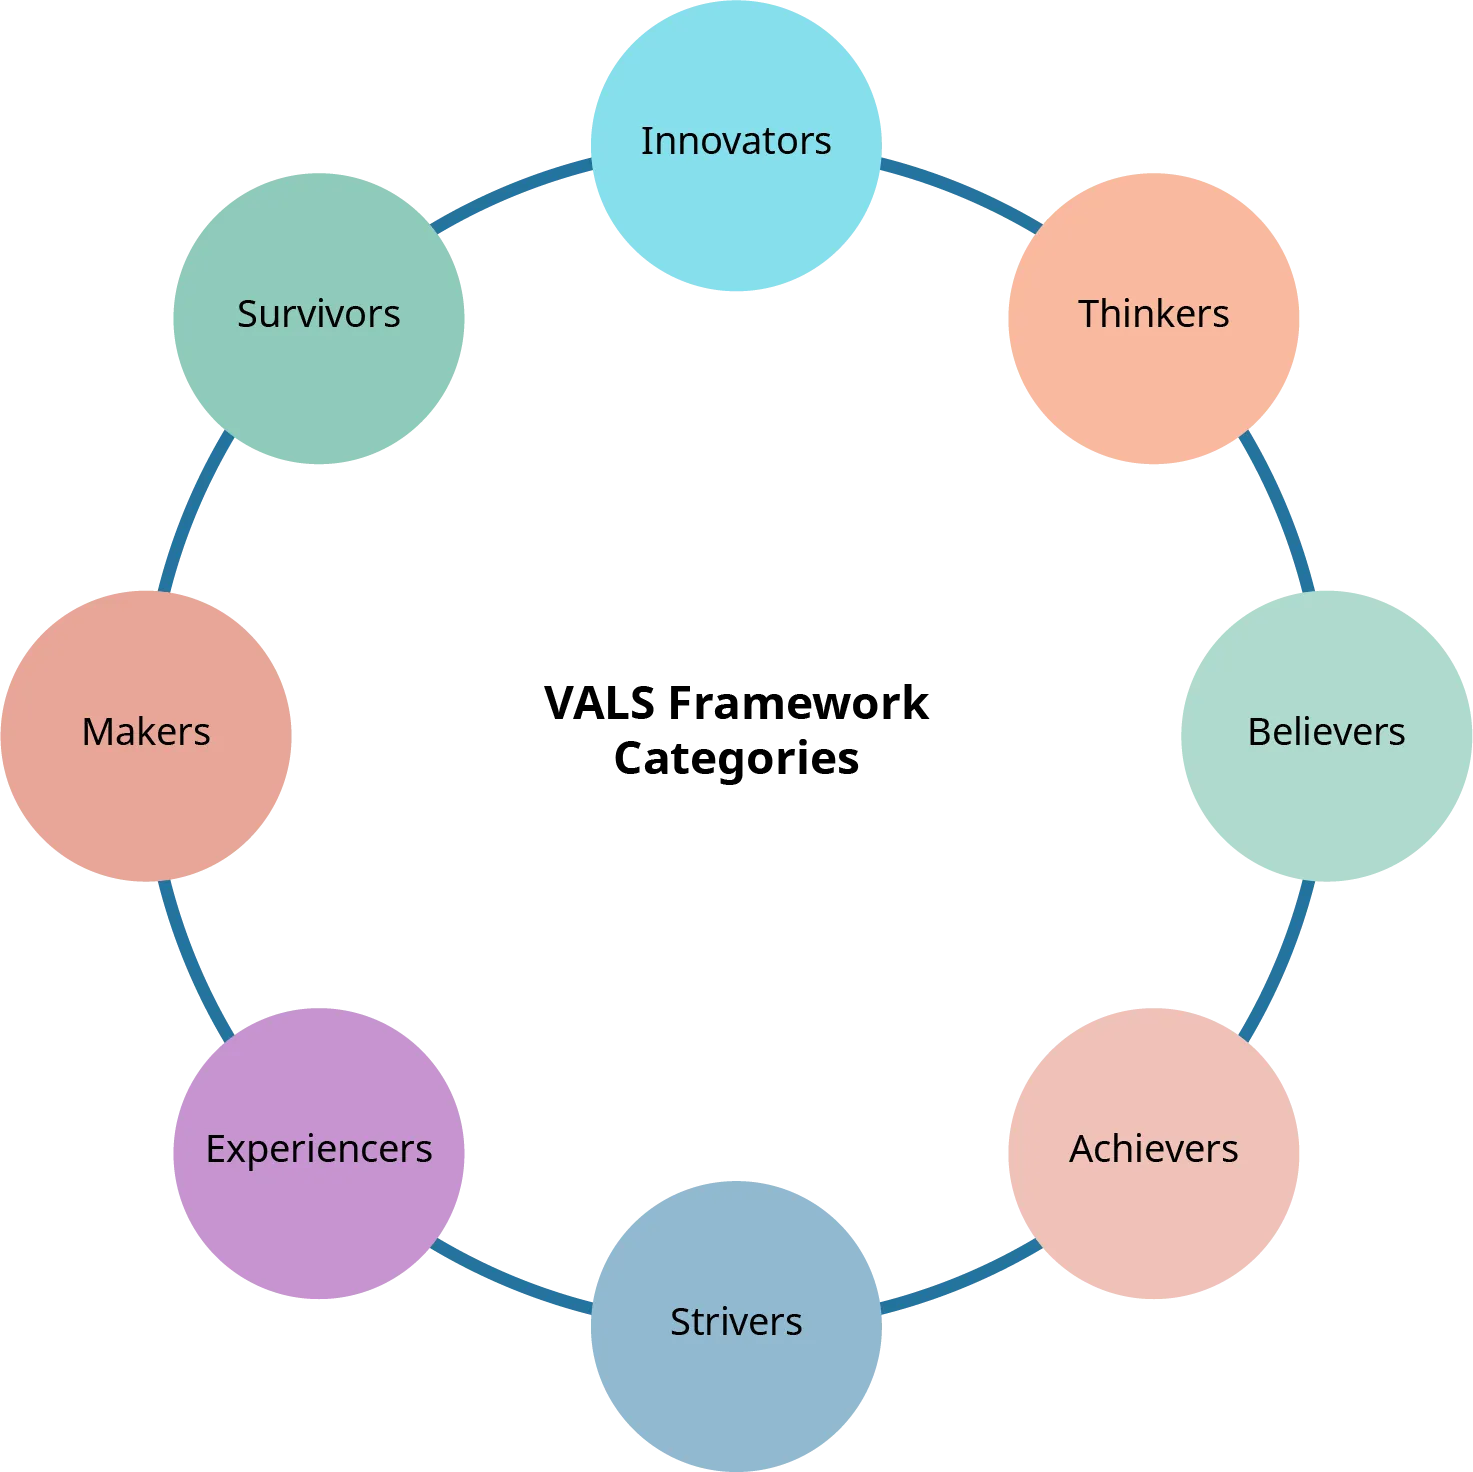 The VALS framework categories are shown as circles connected to one another in a larger circle. Starting at the top and going clockwise, the categories are innovators, thinkers, believers, achievers, strivers, experiencers, makers, and survivors.